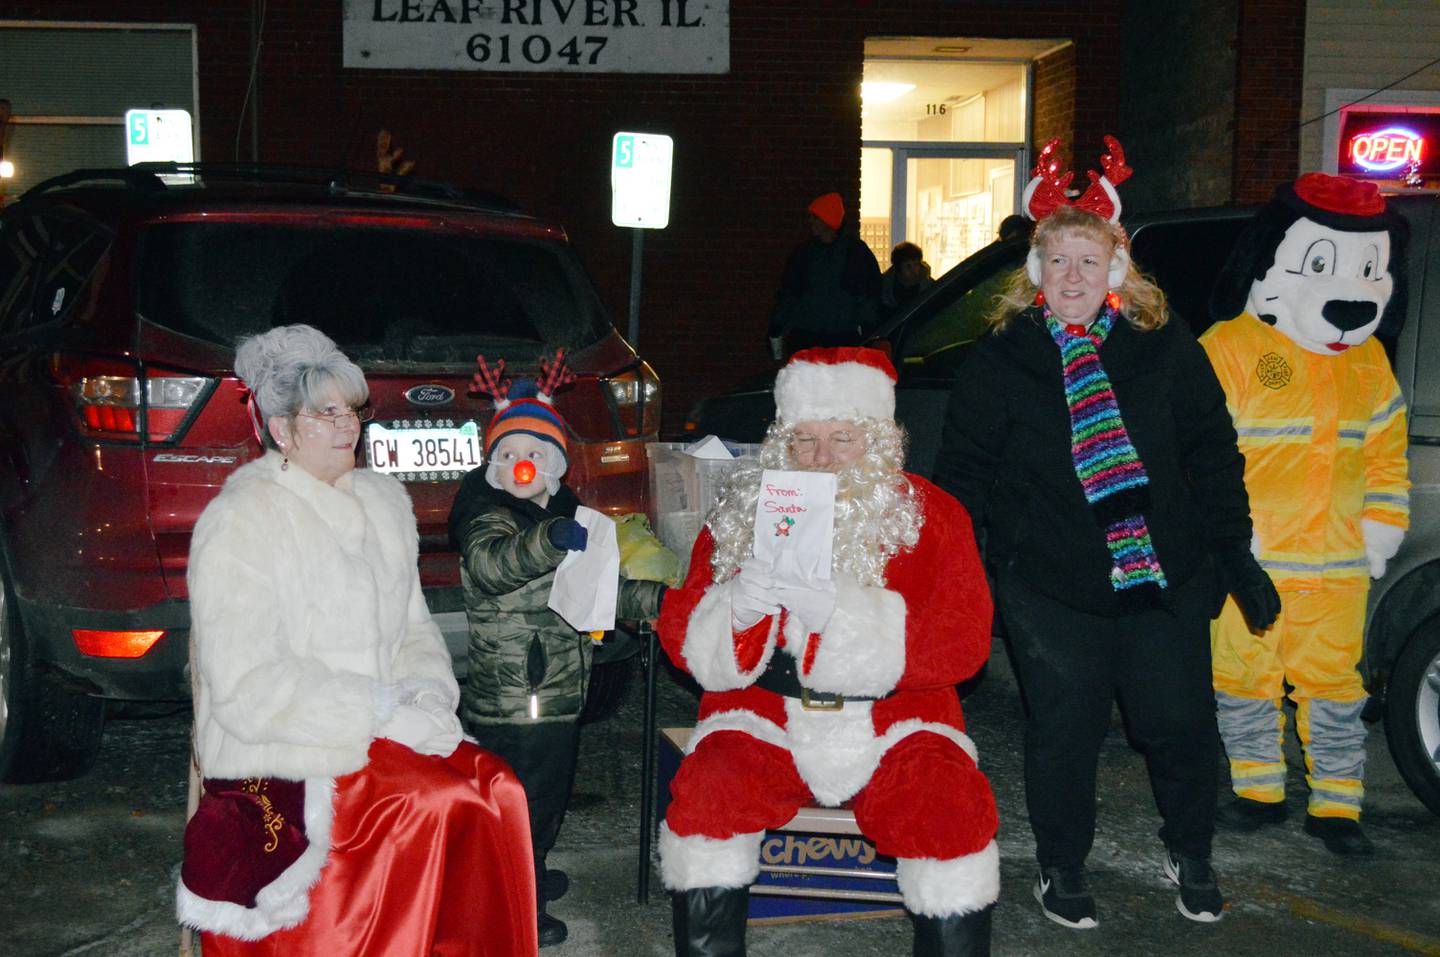 Lee Hammil, 5, of Forreston, stands between Santa and Mrs. Claus acting as their helper during the Dec. 17 Leaf River Christmas celebration. Dawn Plock, a member of the Leaf River Fire Department board, is to the right. The fire department helped organize the meet-and-greet.